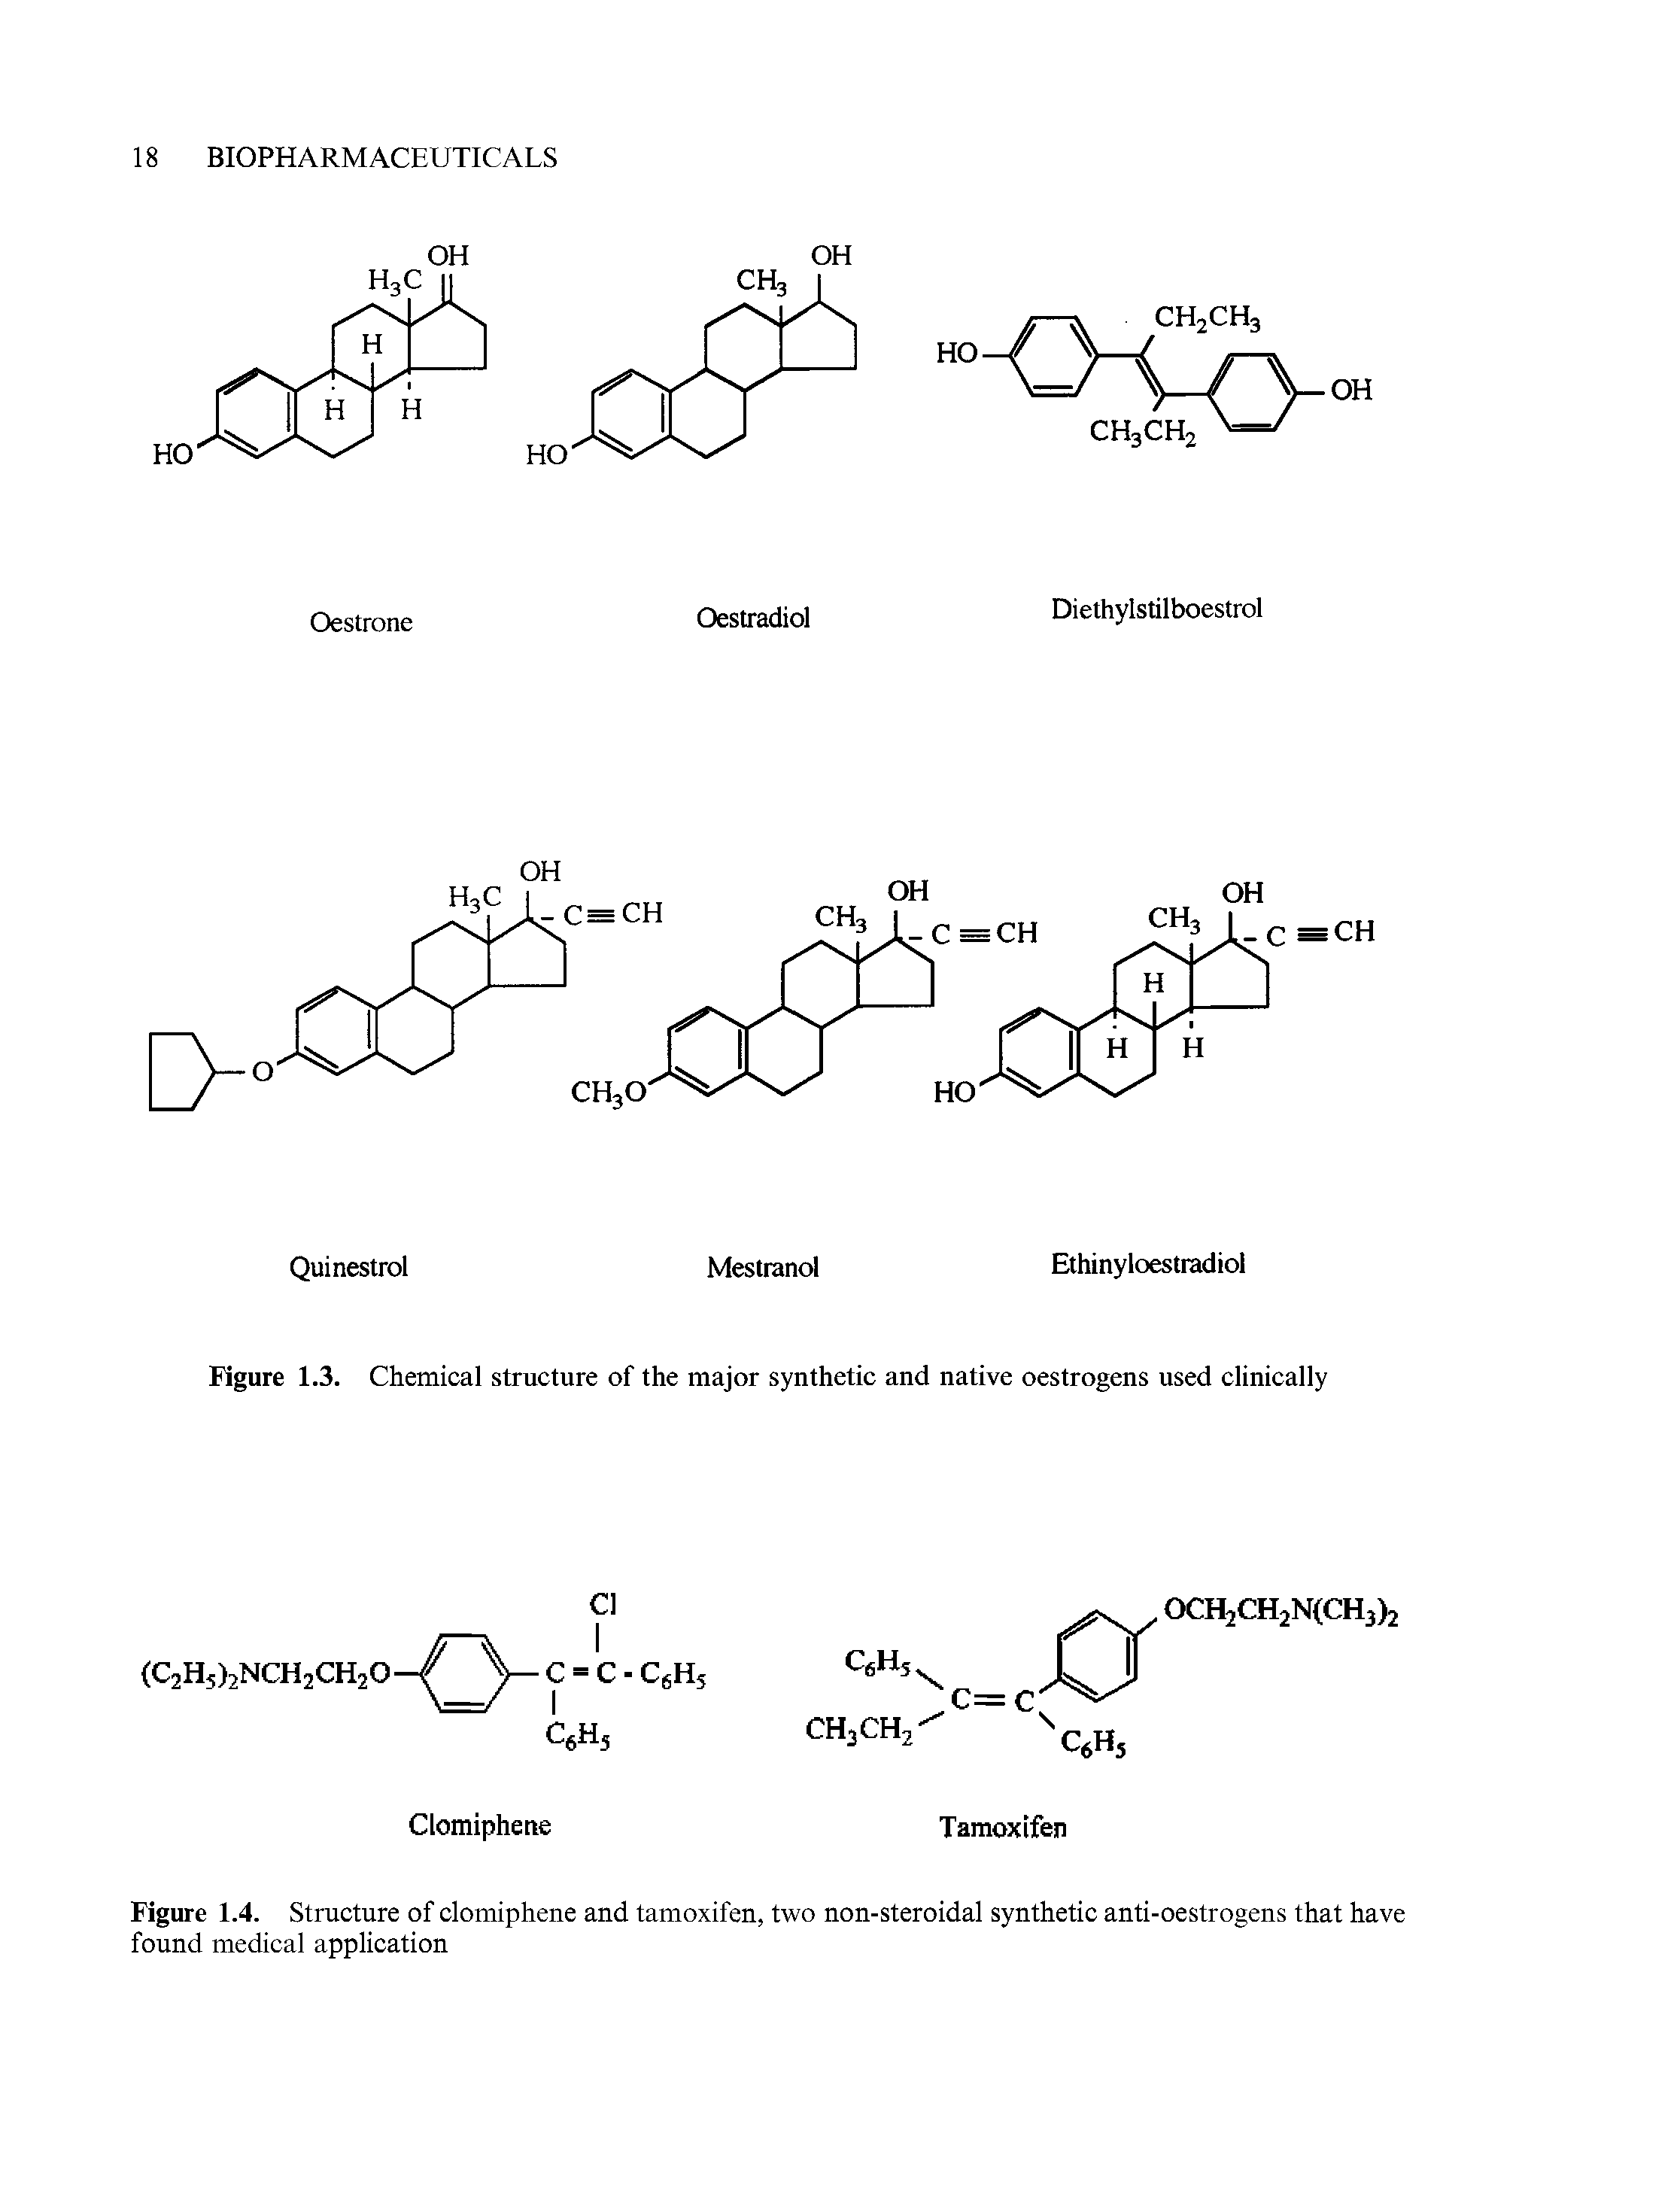 Figure 1.4. Structure of clomiphene and tamoxifen, two non-steroidal synthetic anti-oestrogens that have found medical application...